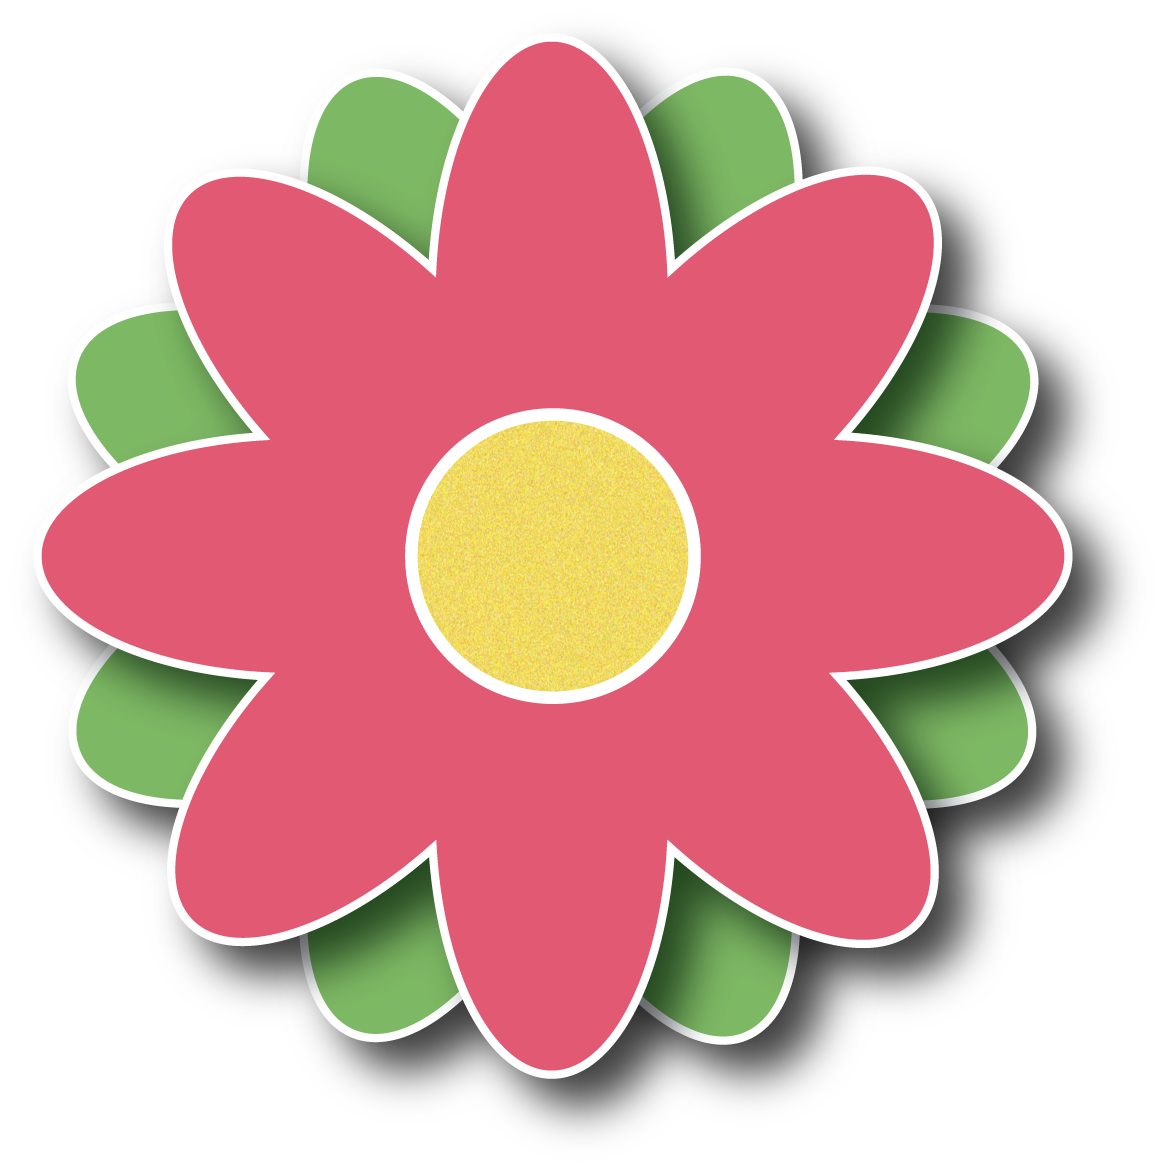 spring flower clipart images - photo #50